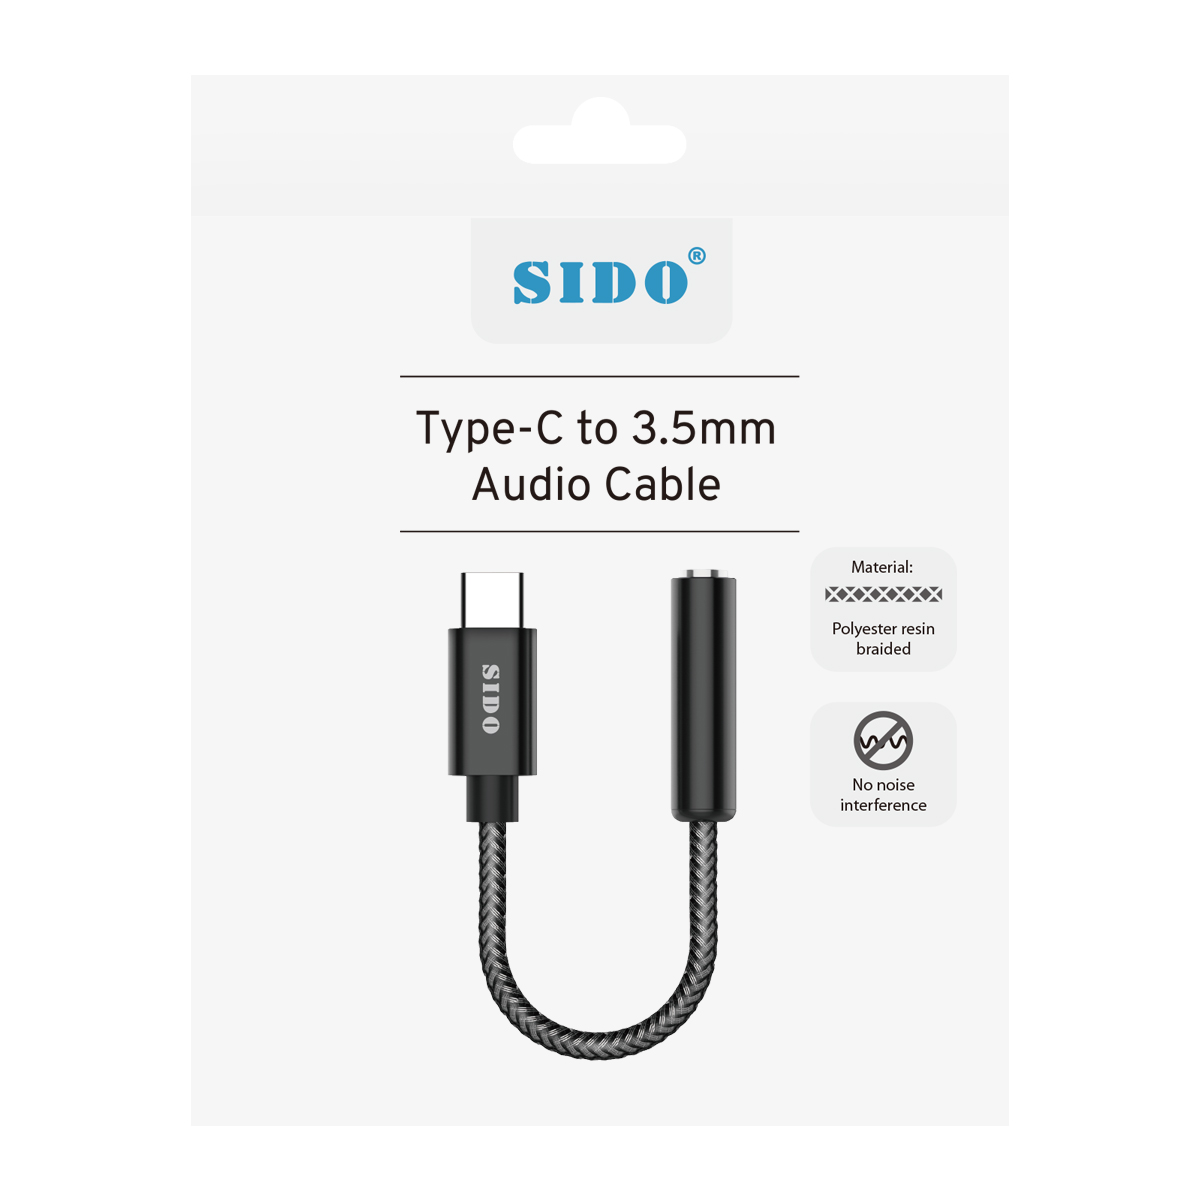 SIDO S229 Type-C to 3.5mm Audio Cable, , large image number 3